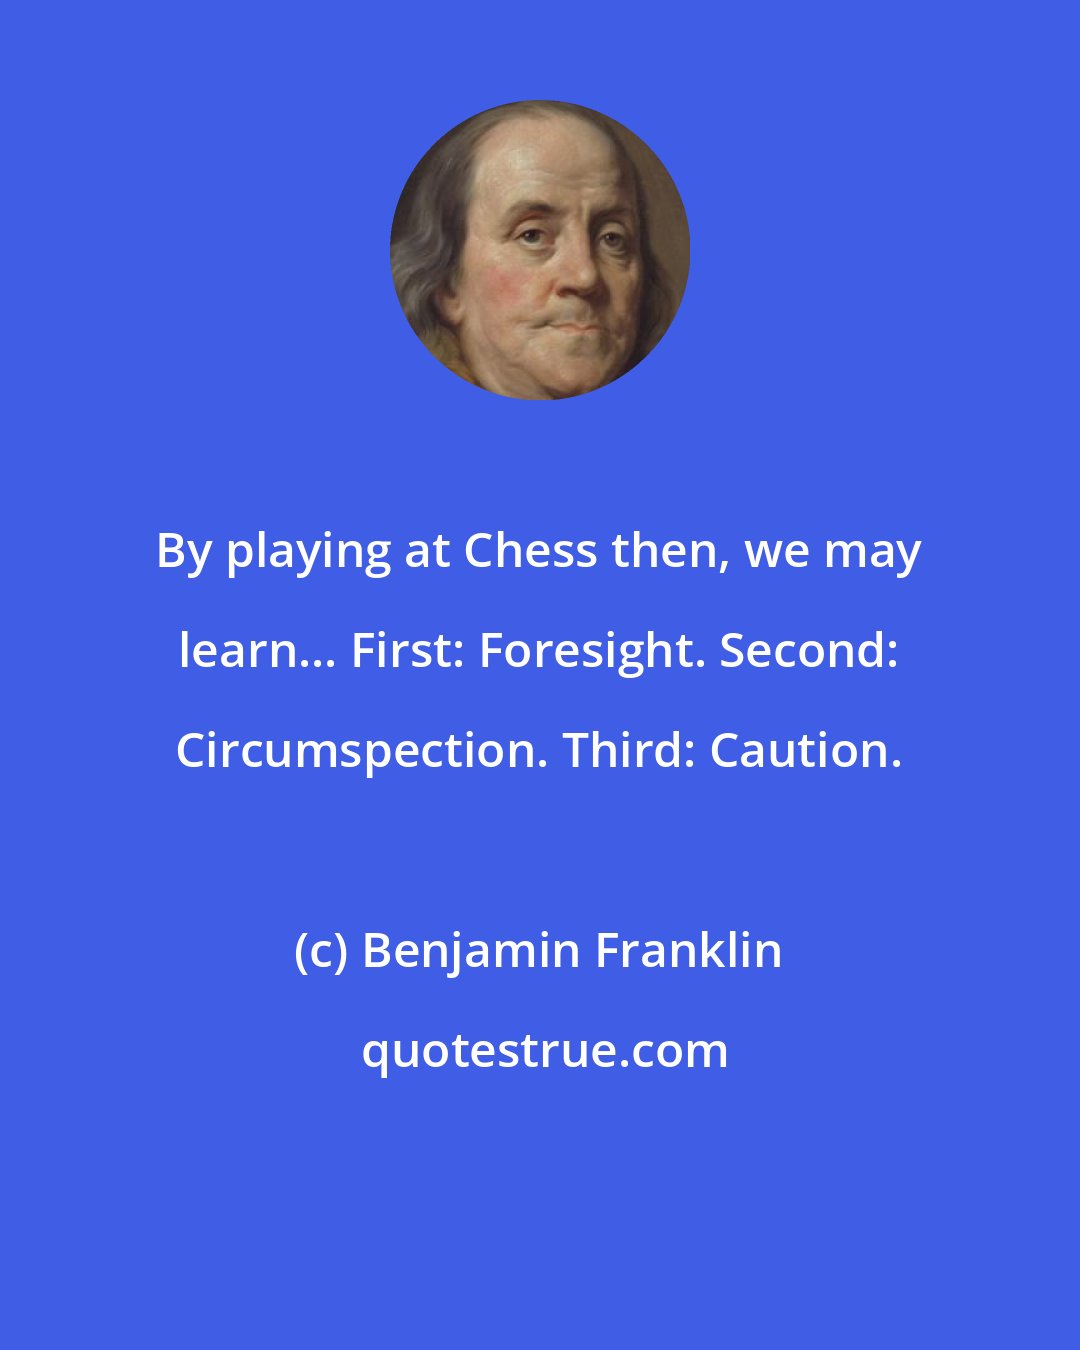 Benjamin Franklin: By playing at Chess then, we may learn... First: Foresight. Second: Circumspection. Third: Caution.